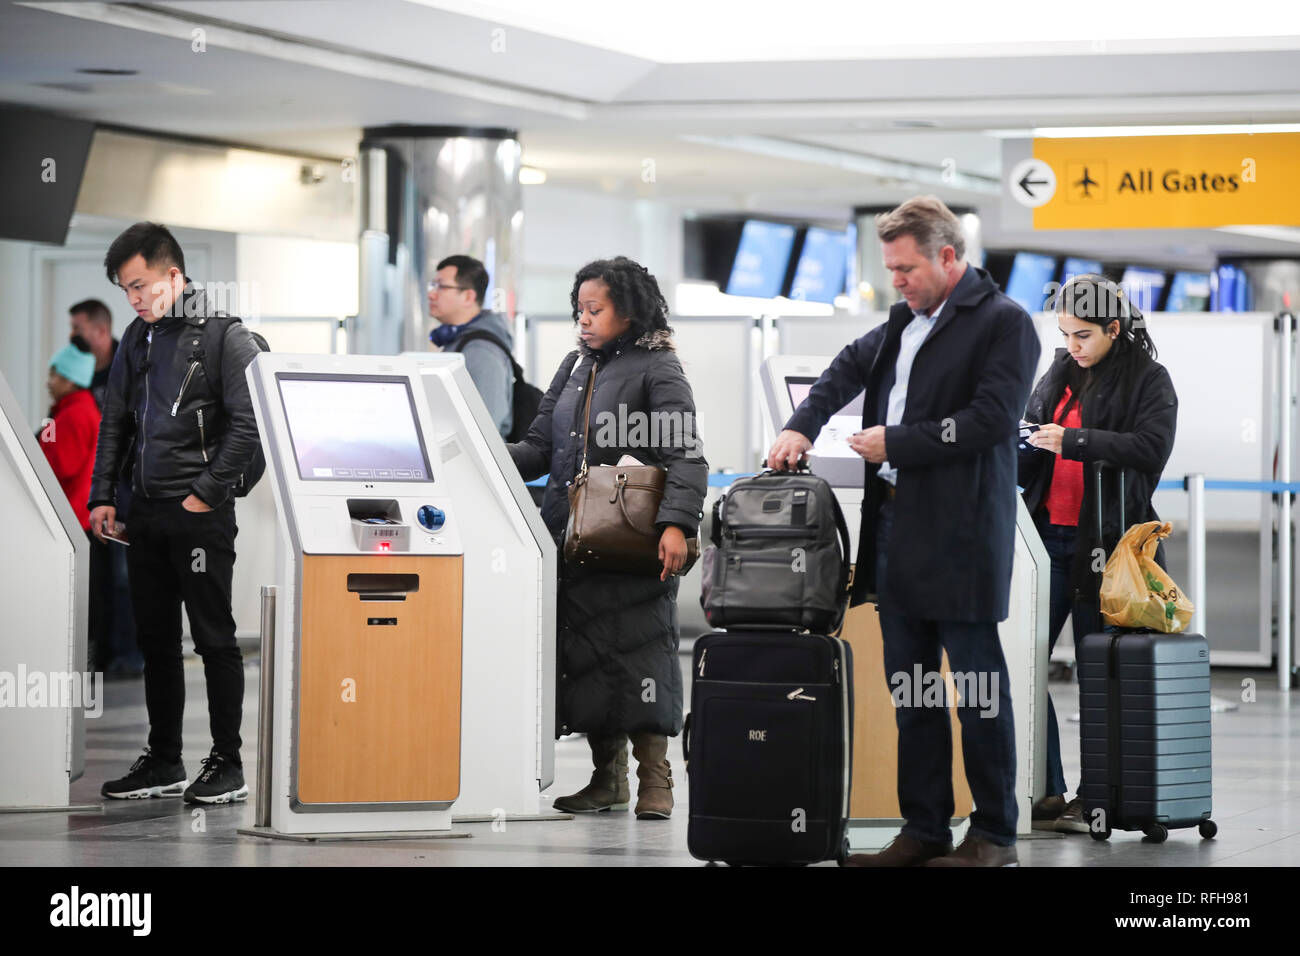 New York, USA. 25th Jan, 2019. Passengers use self-service kiosks to check in at the LaGuardia Airport in New York, the United States, on Jan. 25, 2019. The U.S. Federal Aviation Administration on Friday halted flights bound for New York City's LaGuardia Airport, due to staff shortage caused by the historic government shutdown. Credit: Wang Ying/Xinhua/Alamy Live News Stock Photo